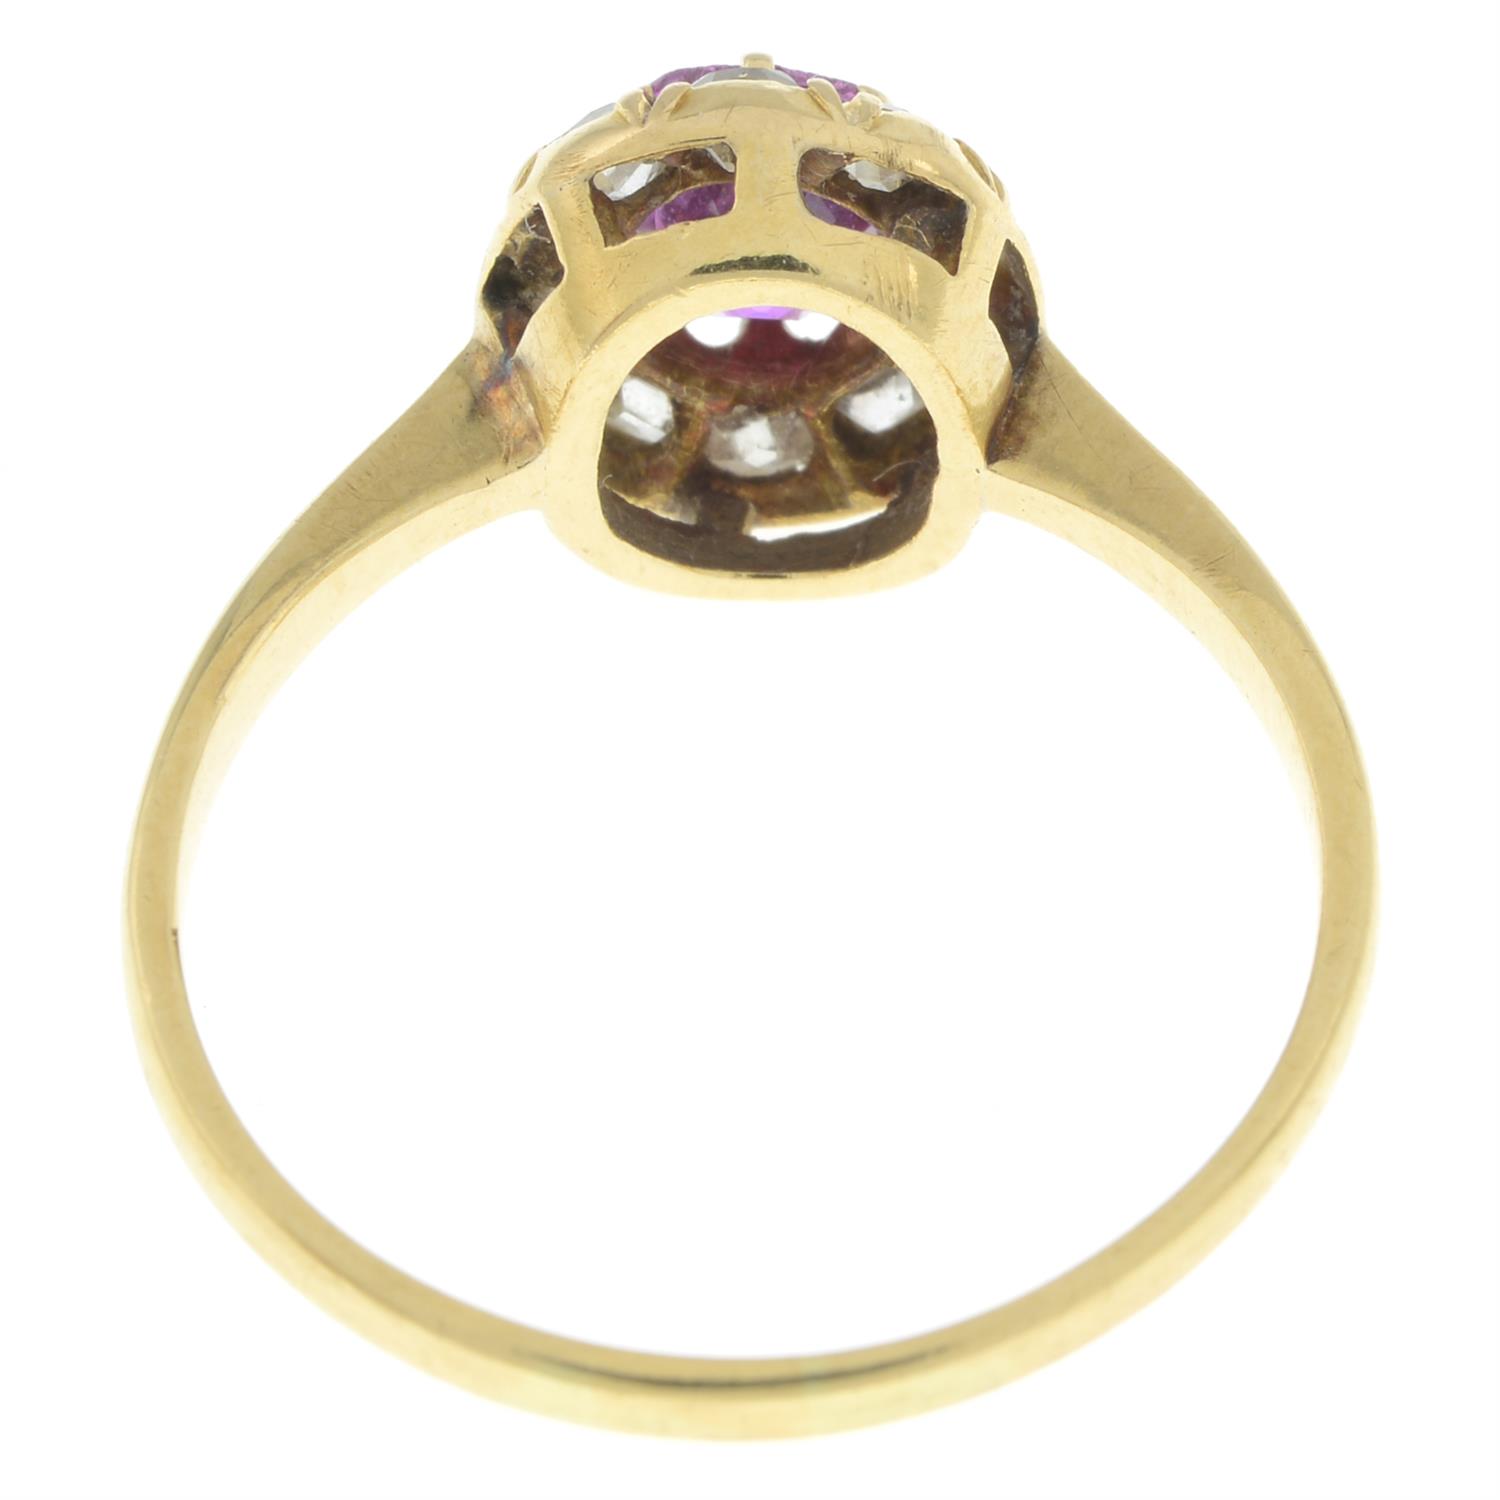 19th century gold Burmese pink sapphire and diamond ring - Image 3 of 5